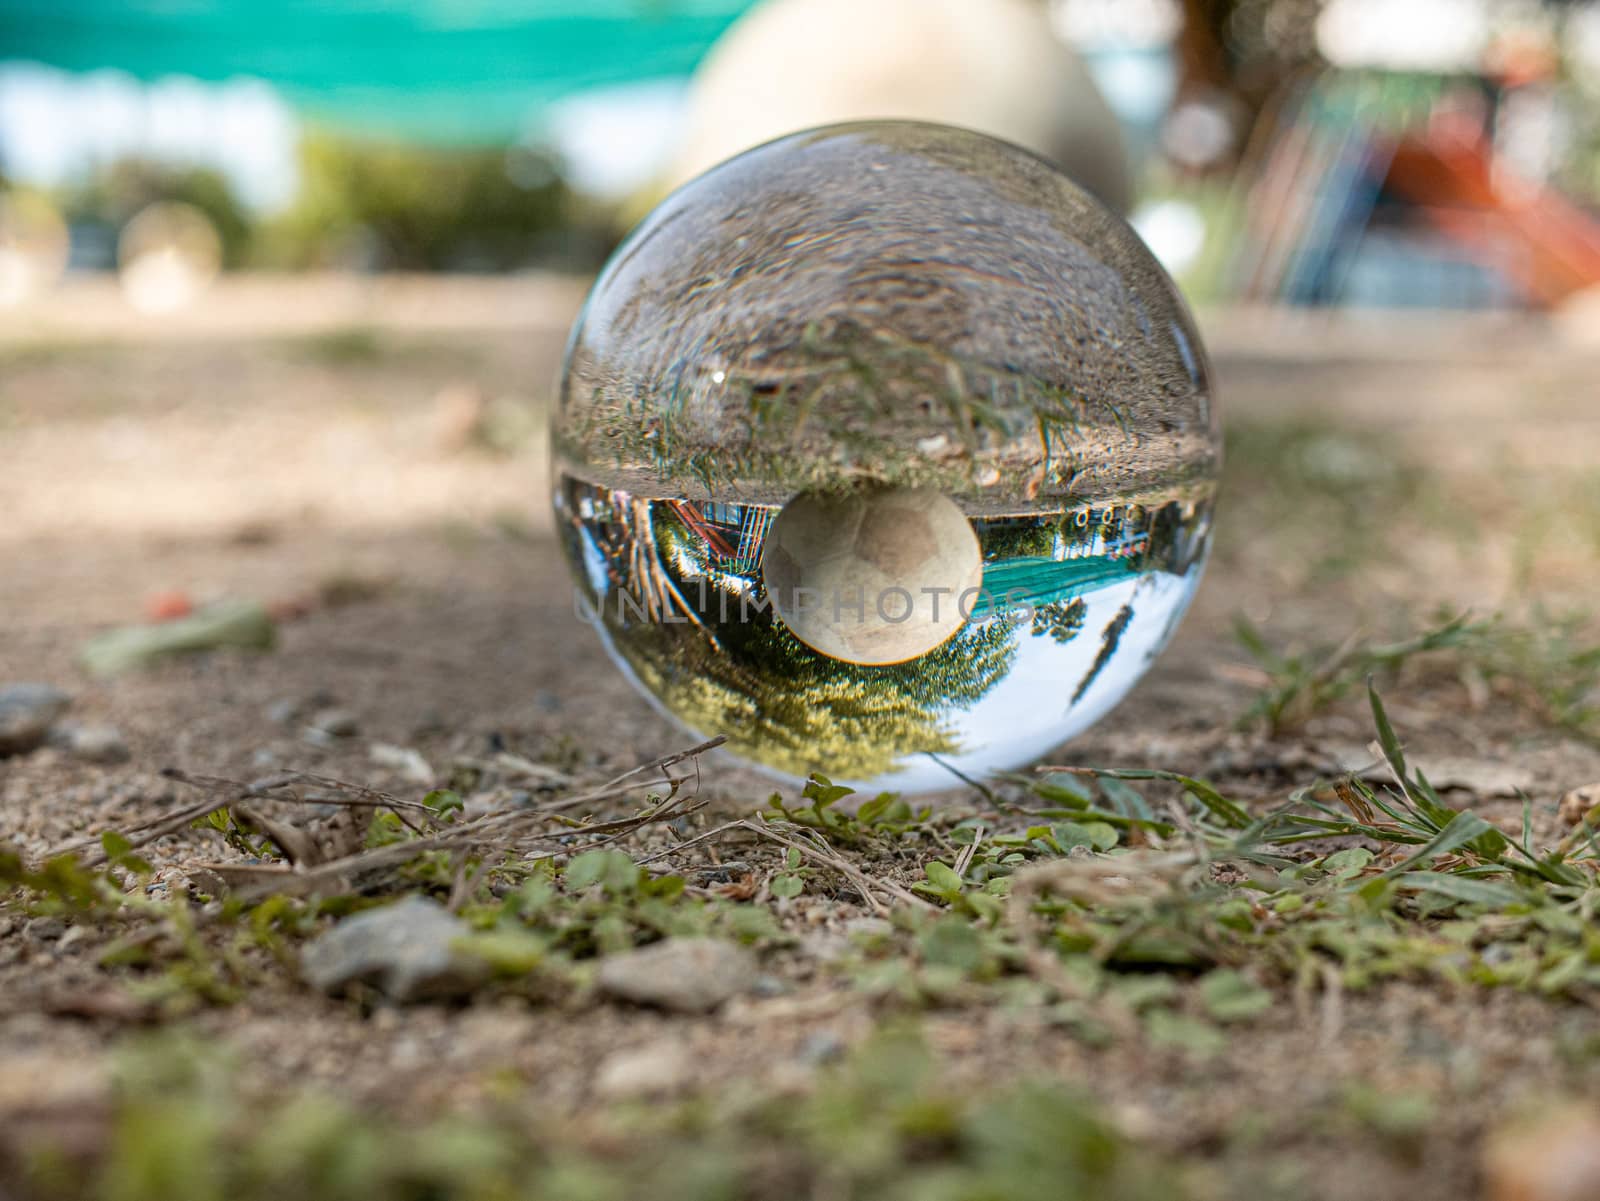 Crystal glass ball sphere place on ground and revealing the inner ball on blurred background.